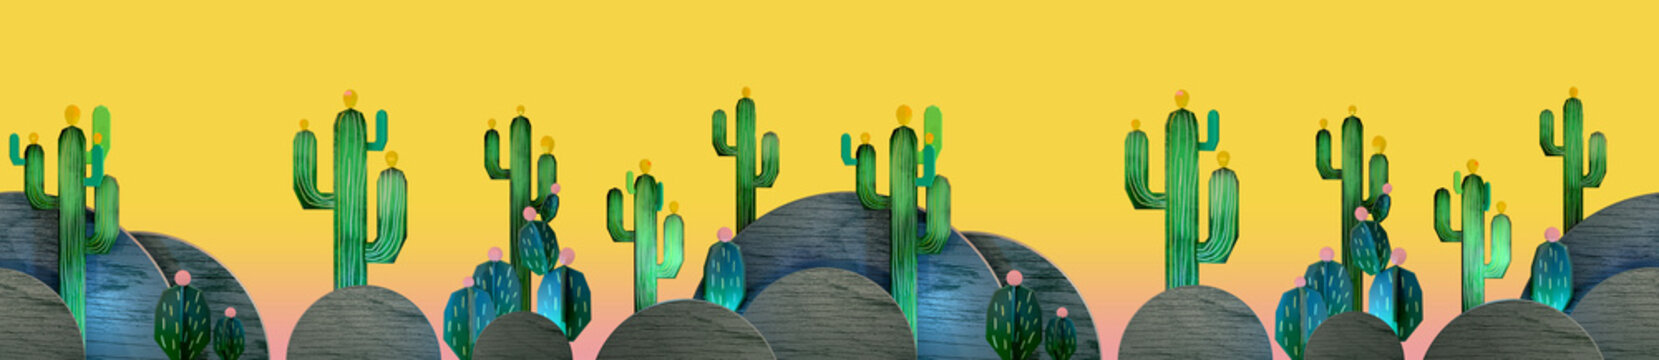 3d cartoon stylized decorations. Mexican theme.  Flat hills with cactuses . Wooden theatrical scenery style, or layered as pop-up books. Seamless border pattern on vivid yellow background..